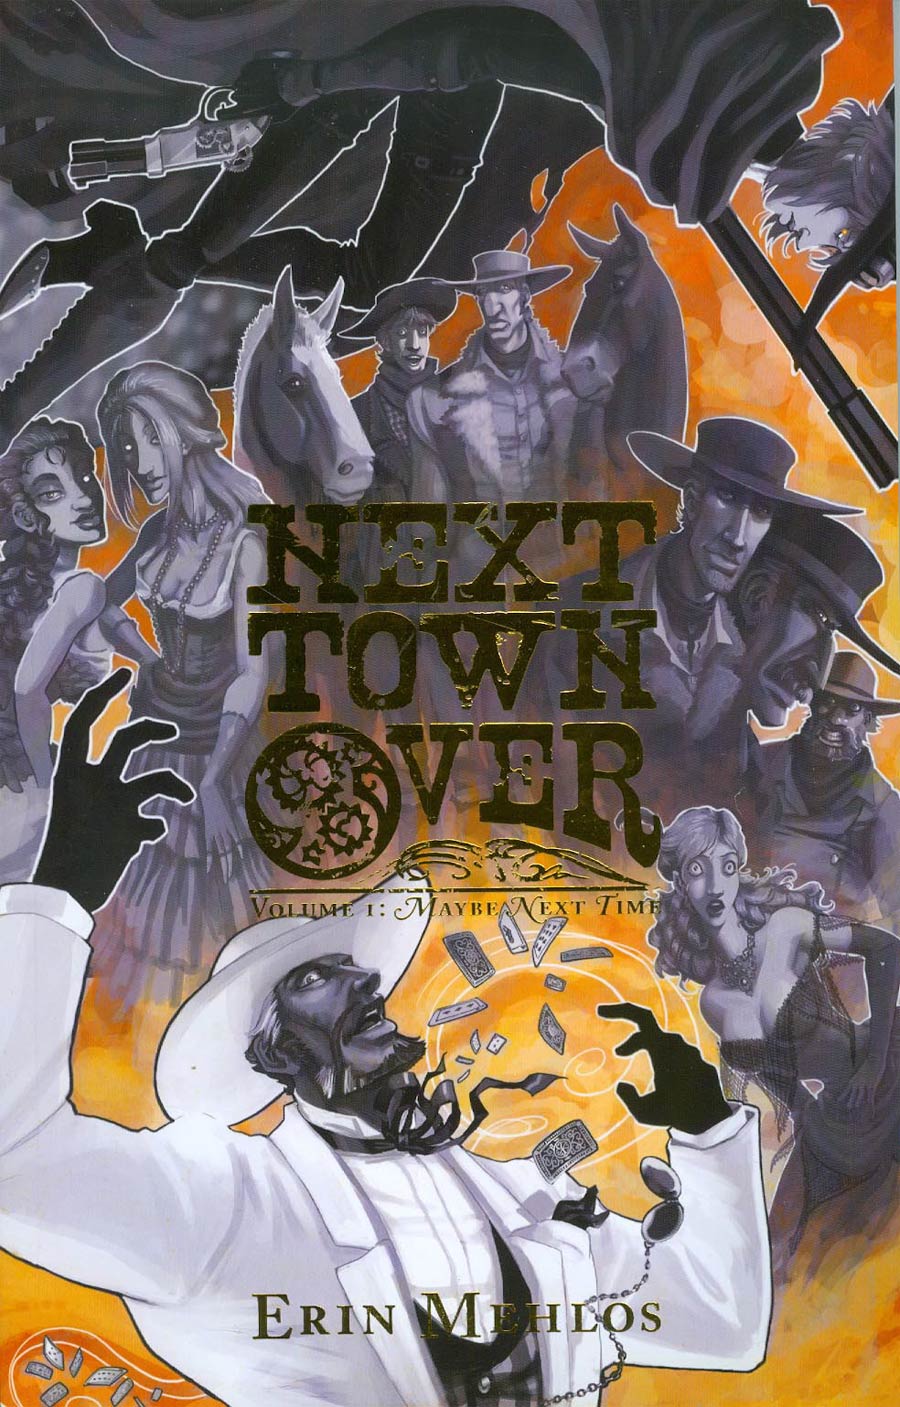 Next Town Over Vol 1 Maybe Next Time TP